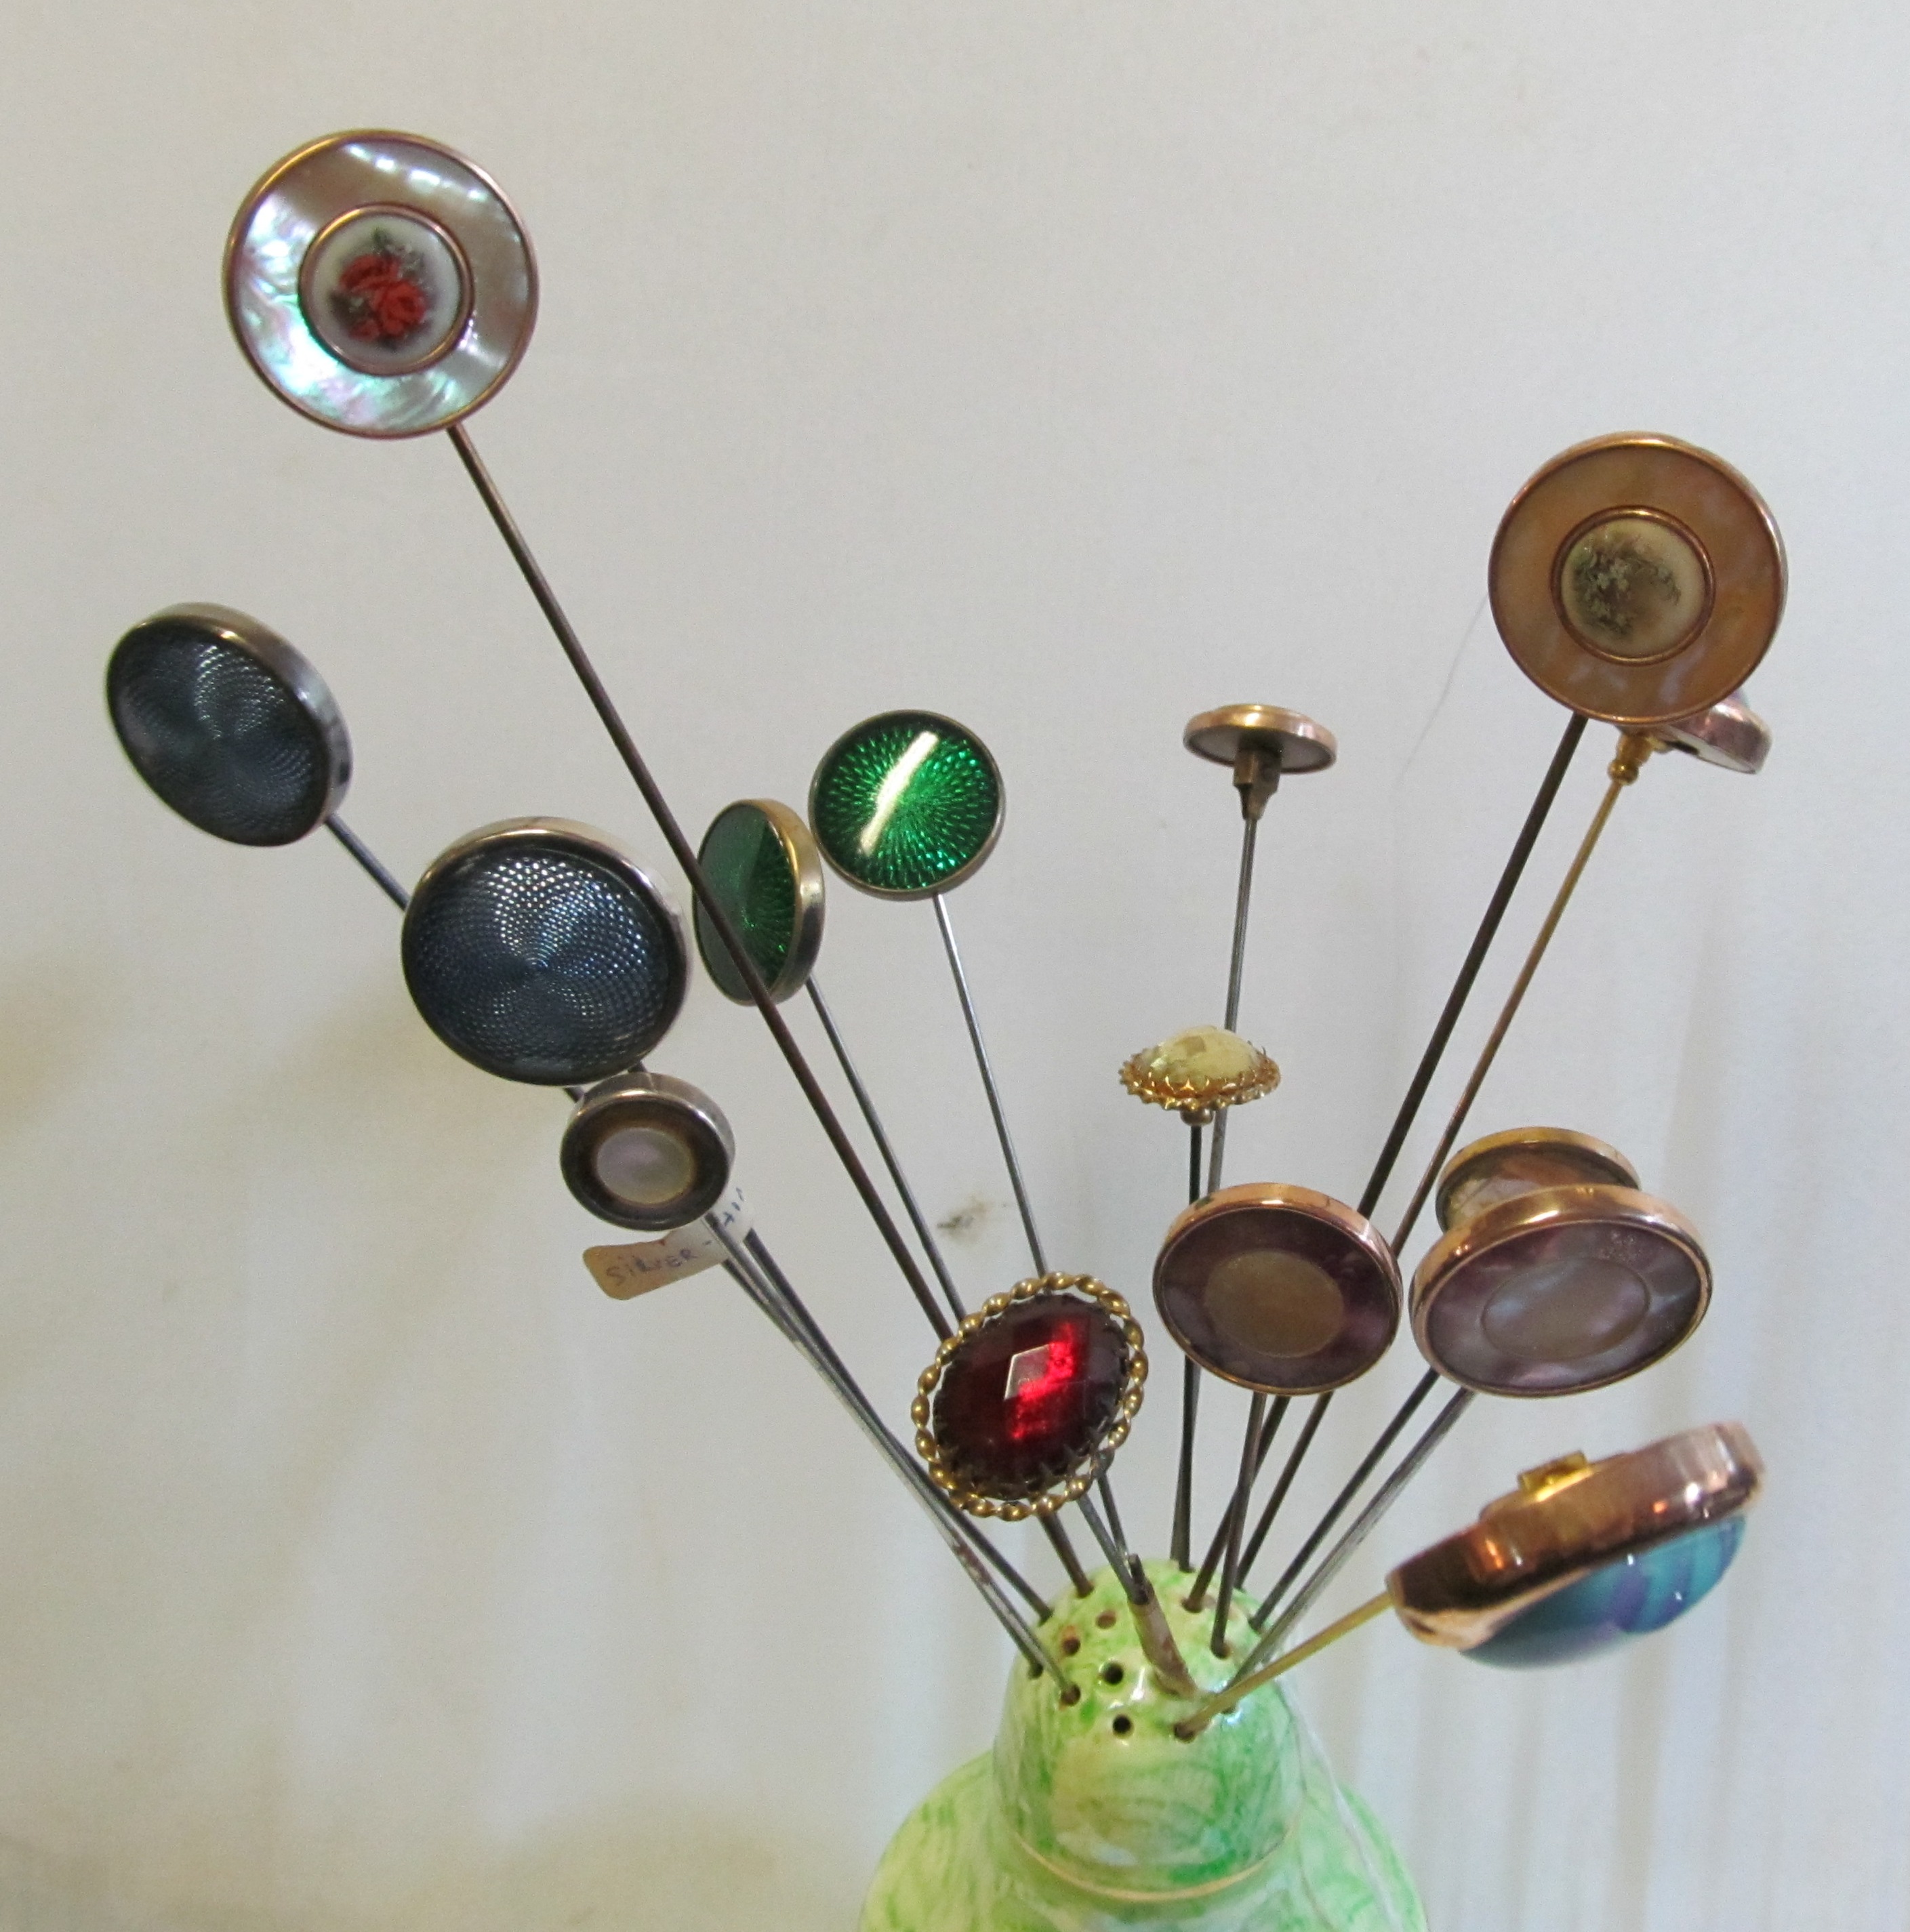 A group of hat pins with button style swivel ends in hat pin holder